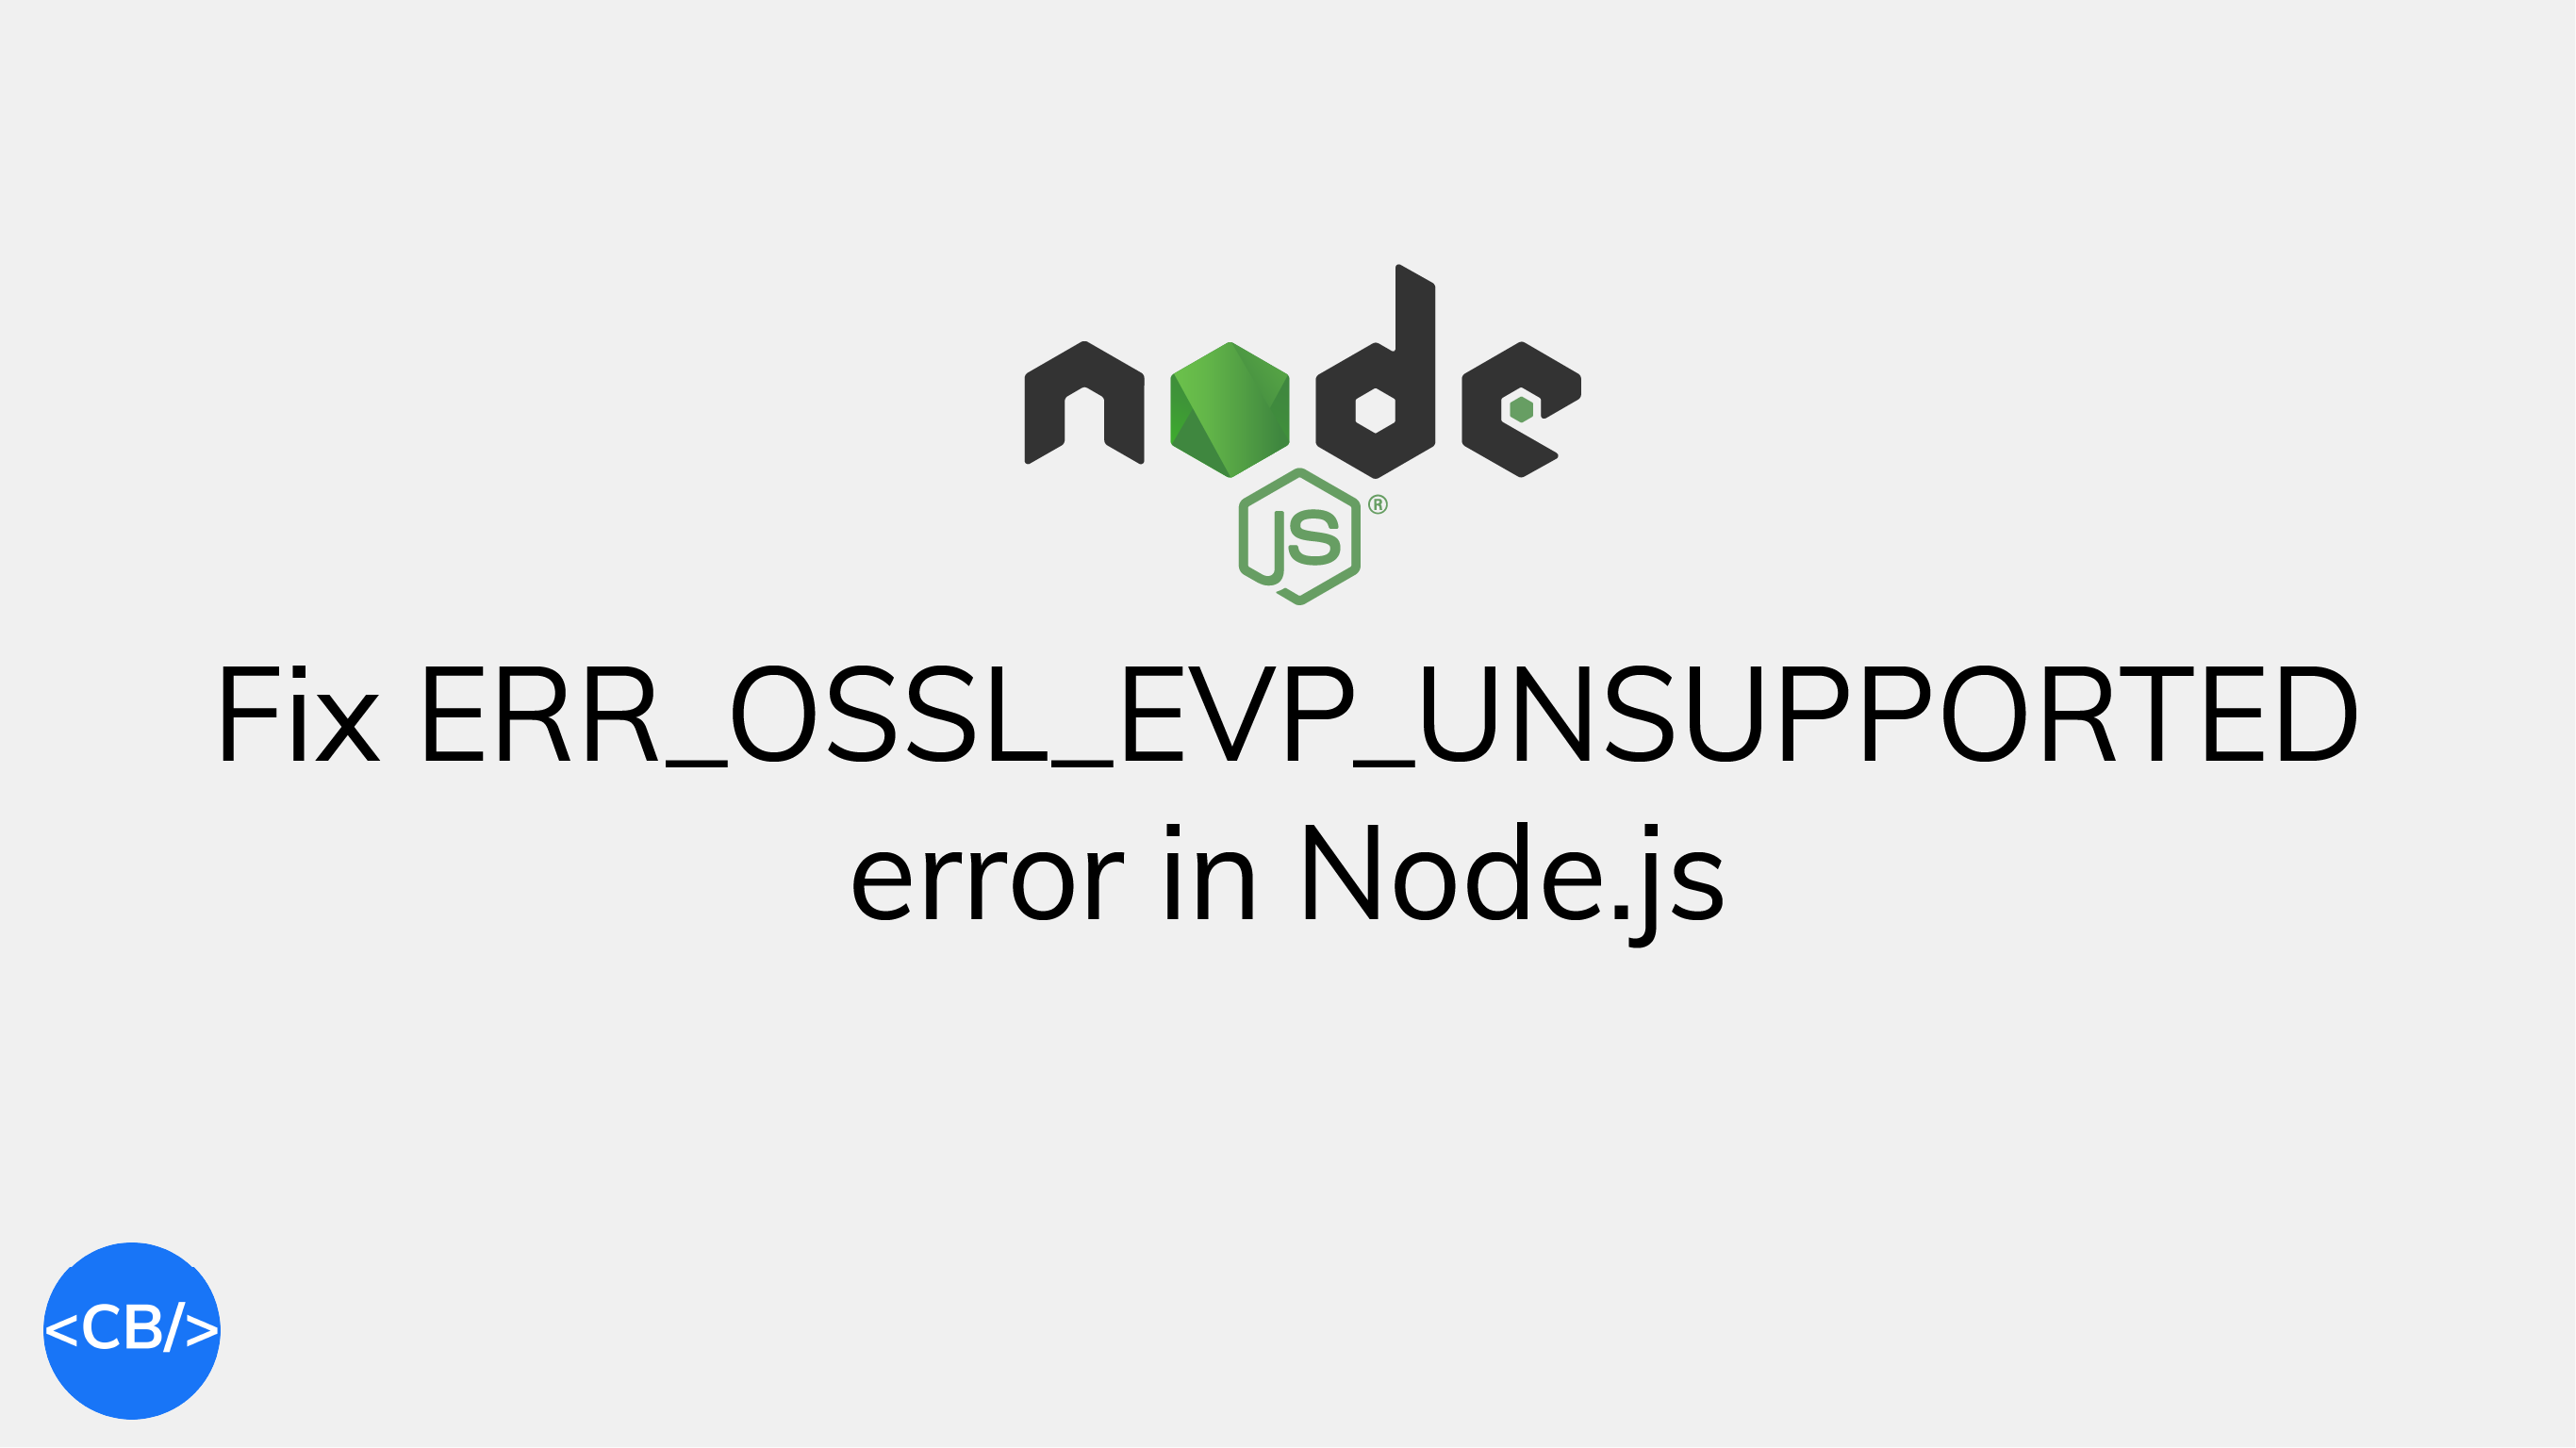 How to quickly fix the ERR_OSSL_EVP_UNSUPPORTED error in Node.js